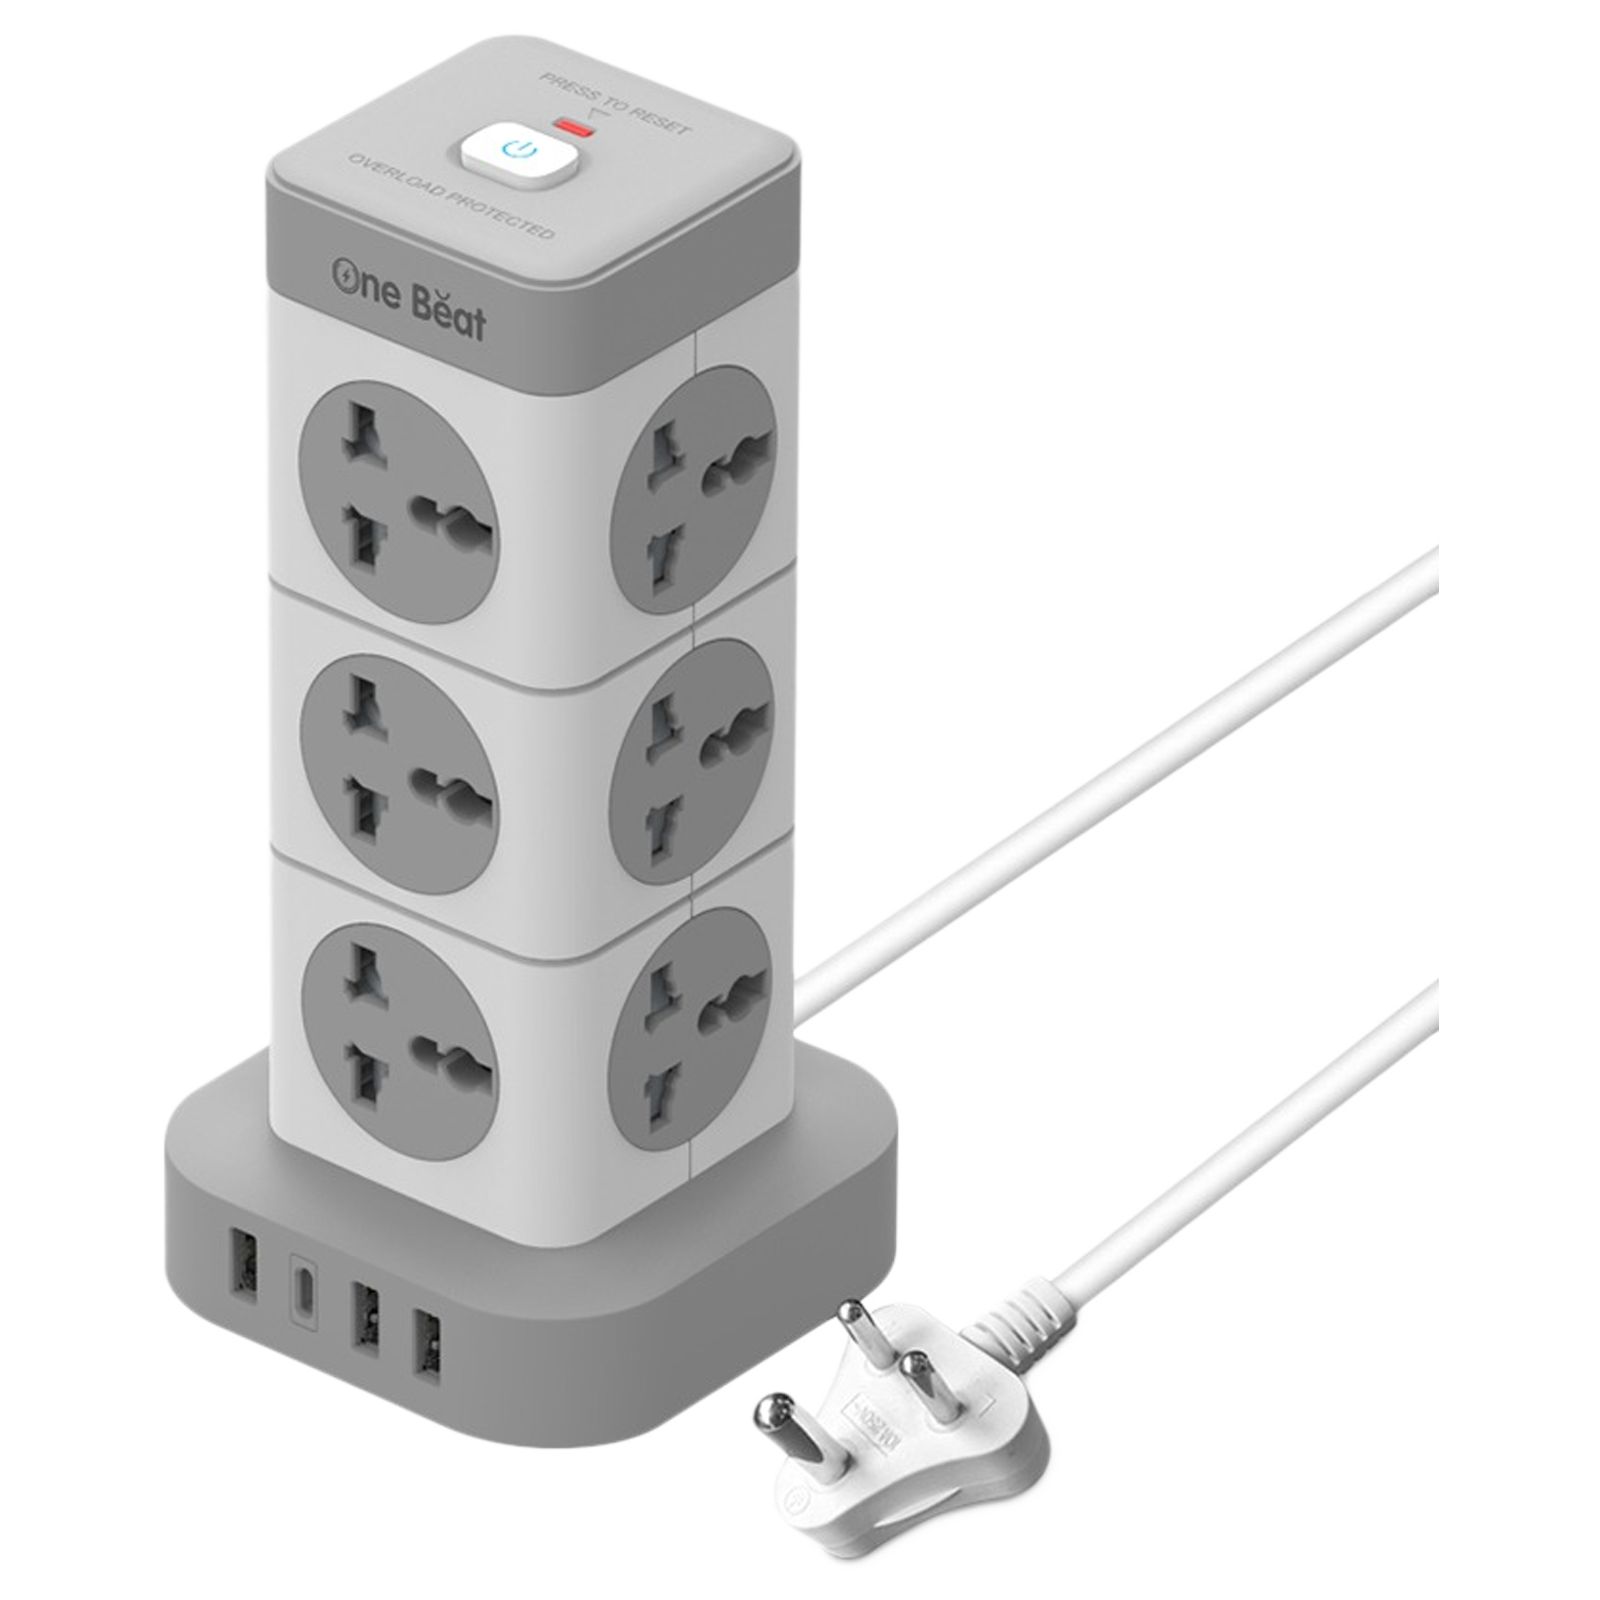 One Beat Tower 10 Amps 12 Sockets Extention Board (2 Meters, Auto Shut Off, OB-201242-U, White and Grey)